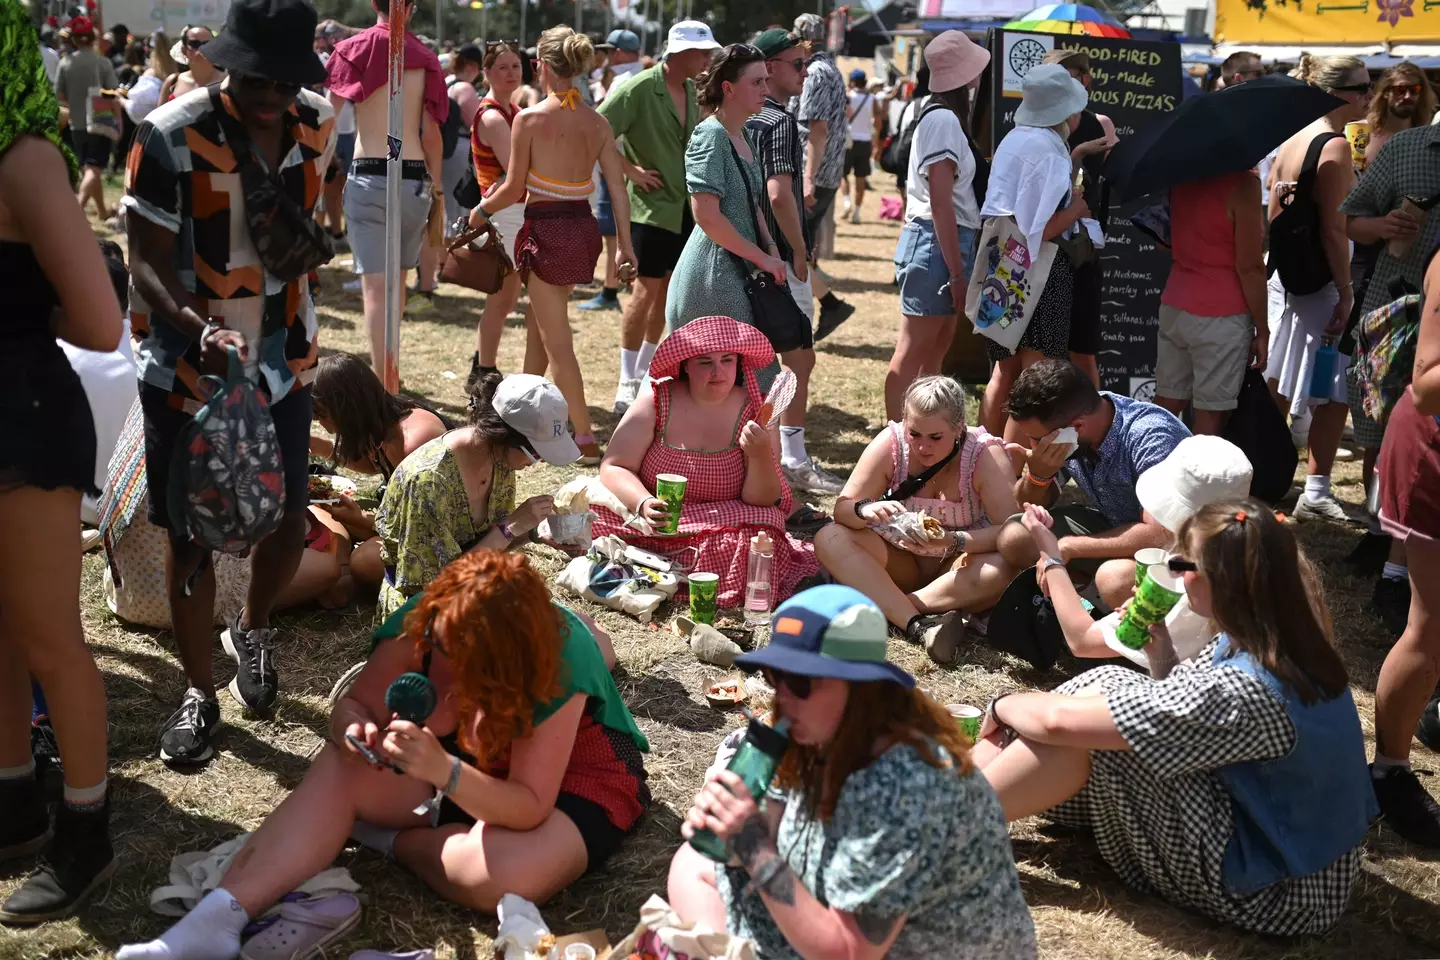 Festivalgoers at last year's event (OLI SCARFF/AFP via Getty Images)